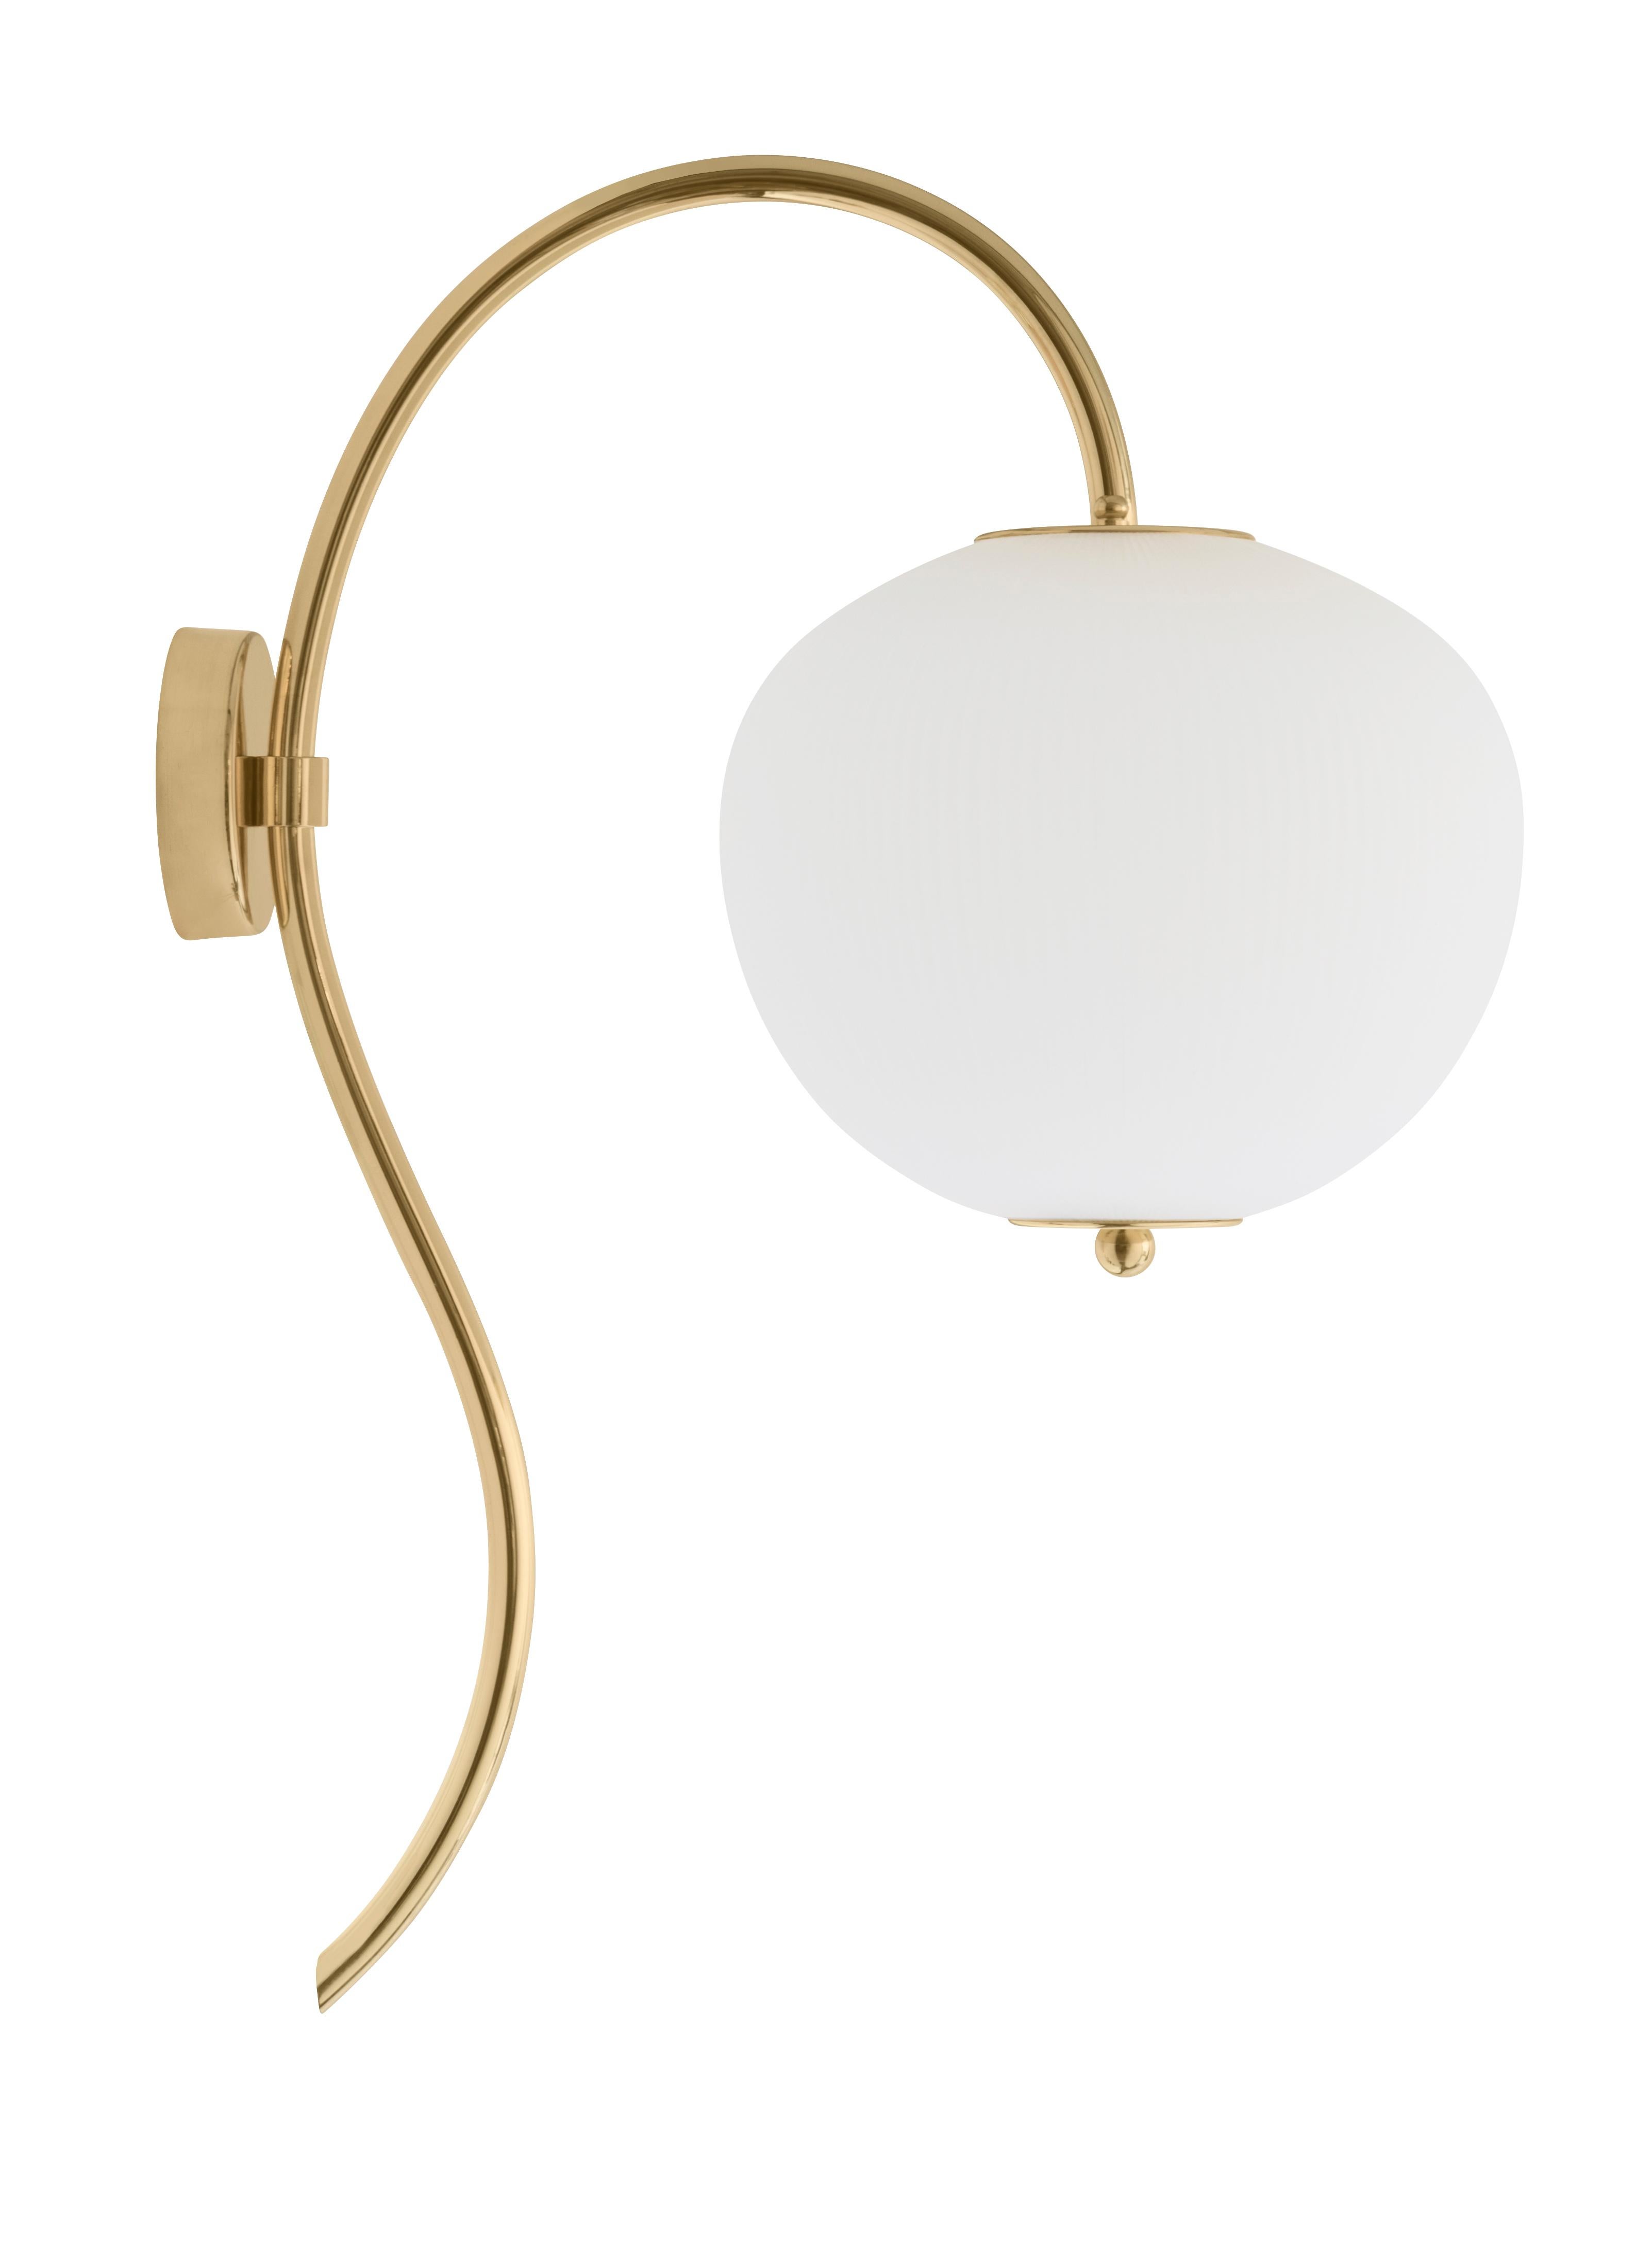 Wall lamp China 03 by Magic Circus Editions
Dimensions: H 62 x W 26.2 x D 41.5 cm
Materials: Brass, mouth blown glass sculpted with a diamond saw
Colour: enamel soft white

Available finishes: Brass, nickel
Available colours: enamel soft